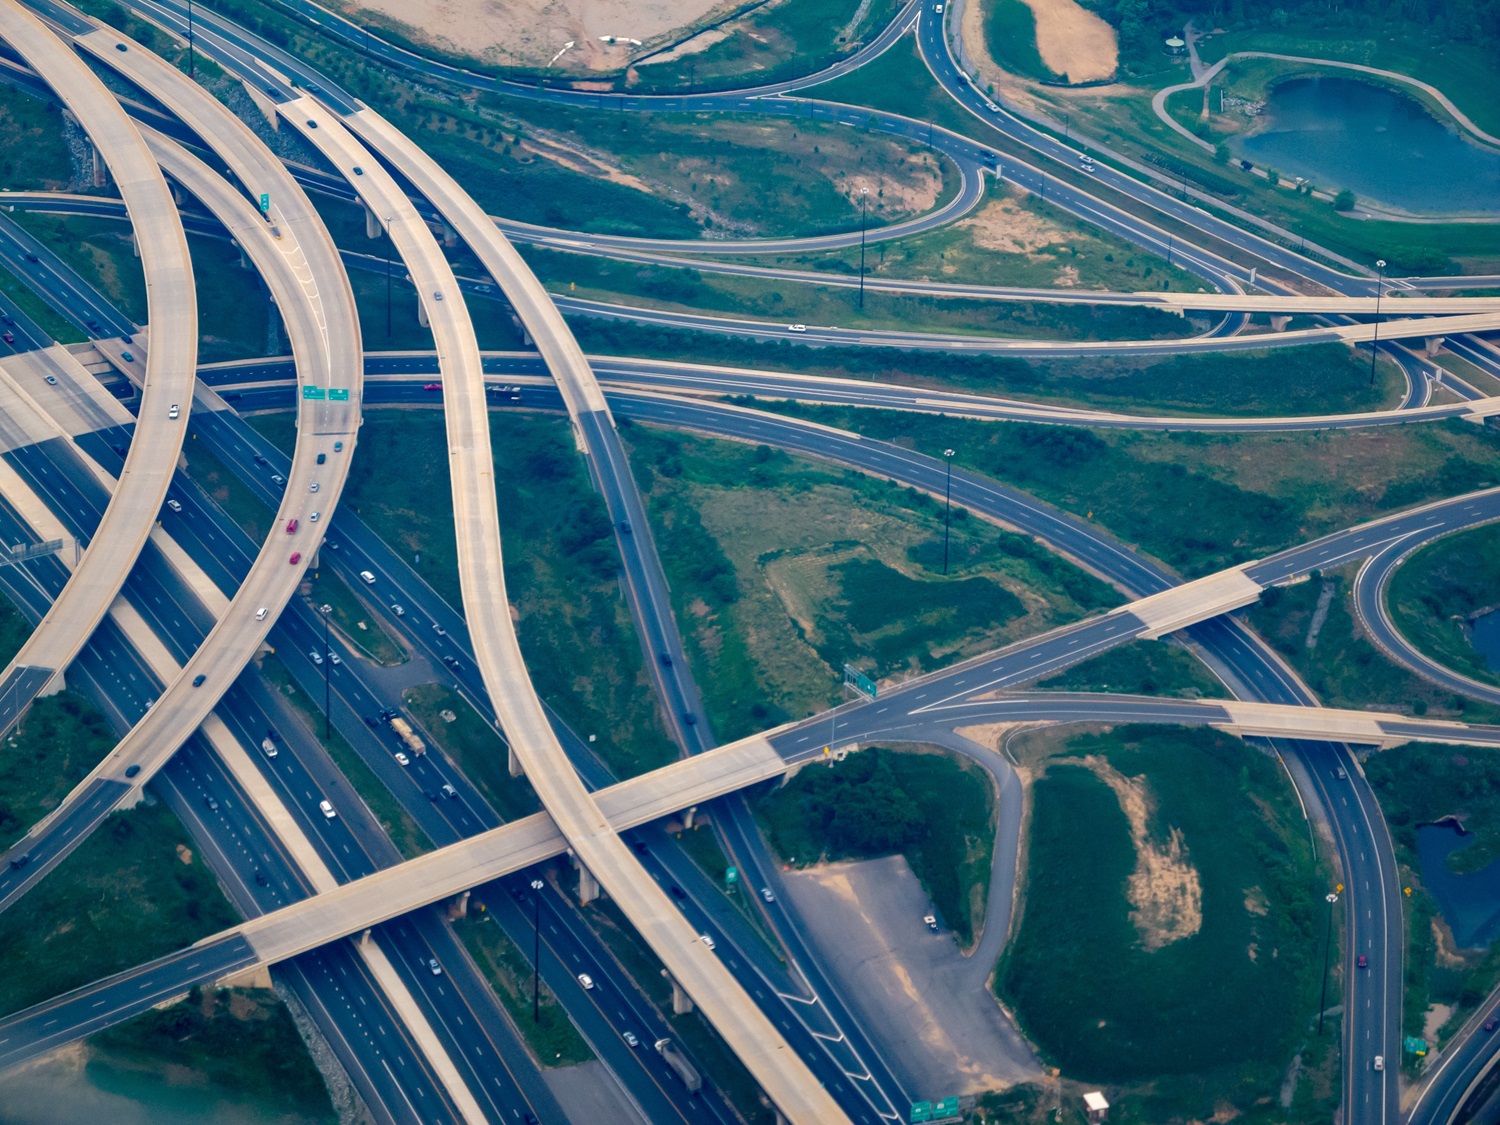 Highway and Roads interlocking - Analogy of  the world wide web (WWW) internet with roads